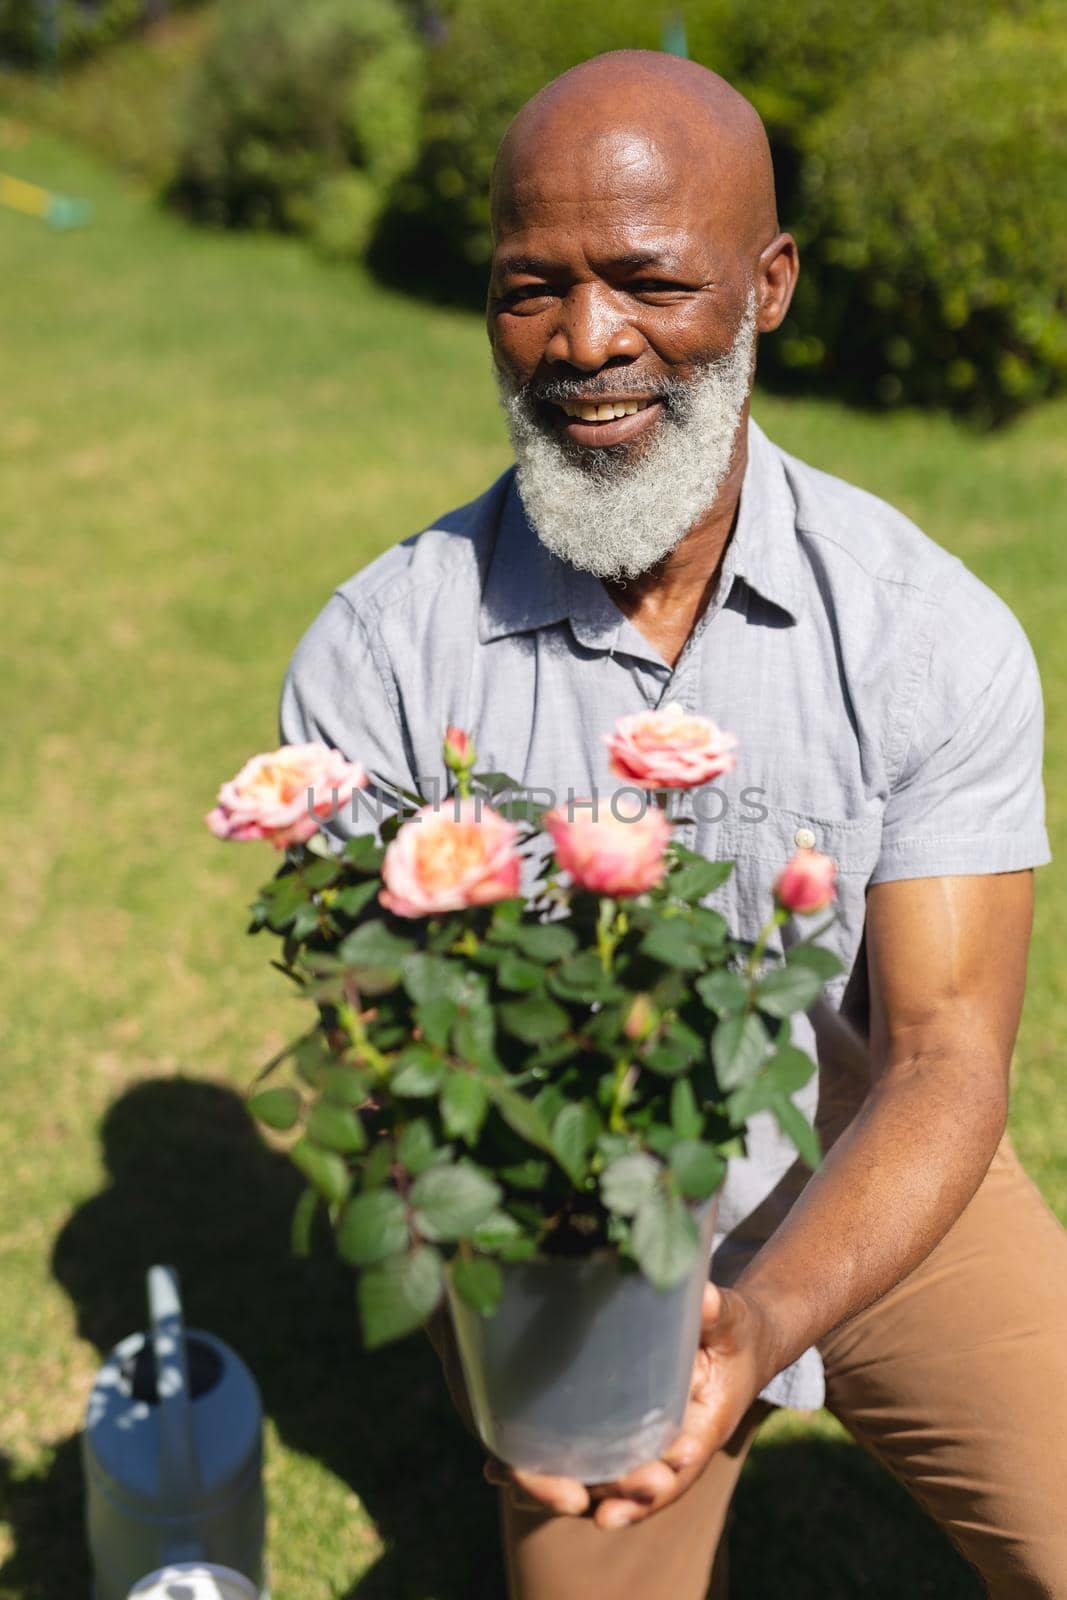 Portrait of senior african american man spending time in sunny garden holding flowers. retreat, retirement and happy senior lifestyle concept.